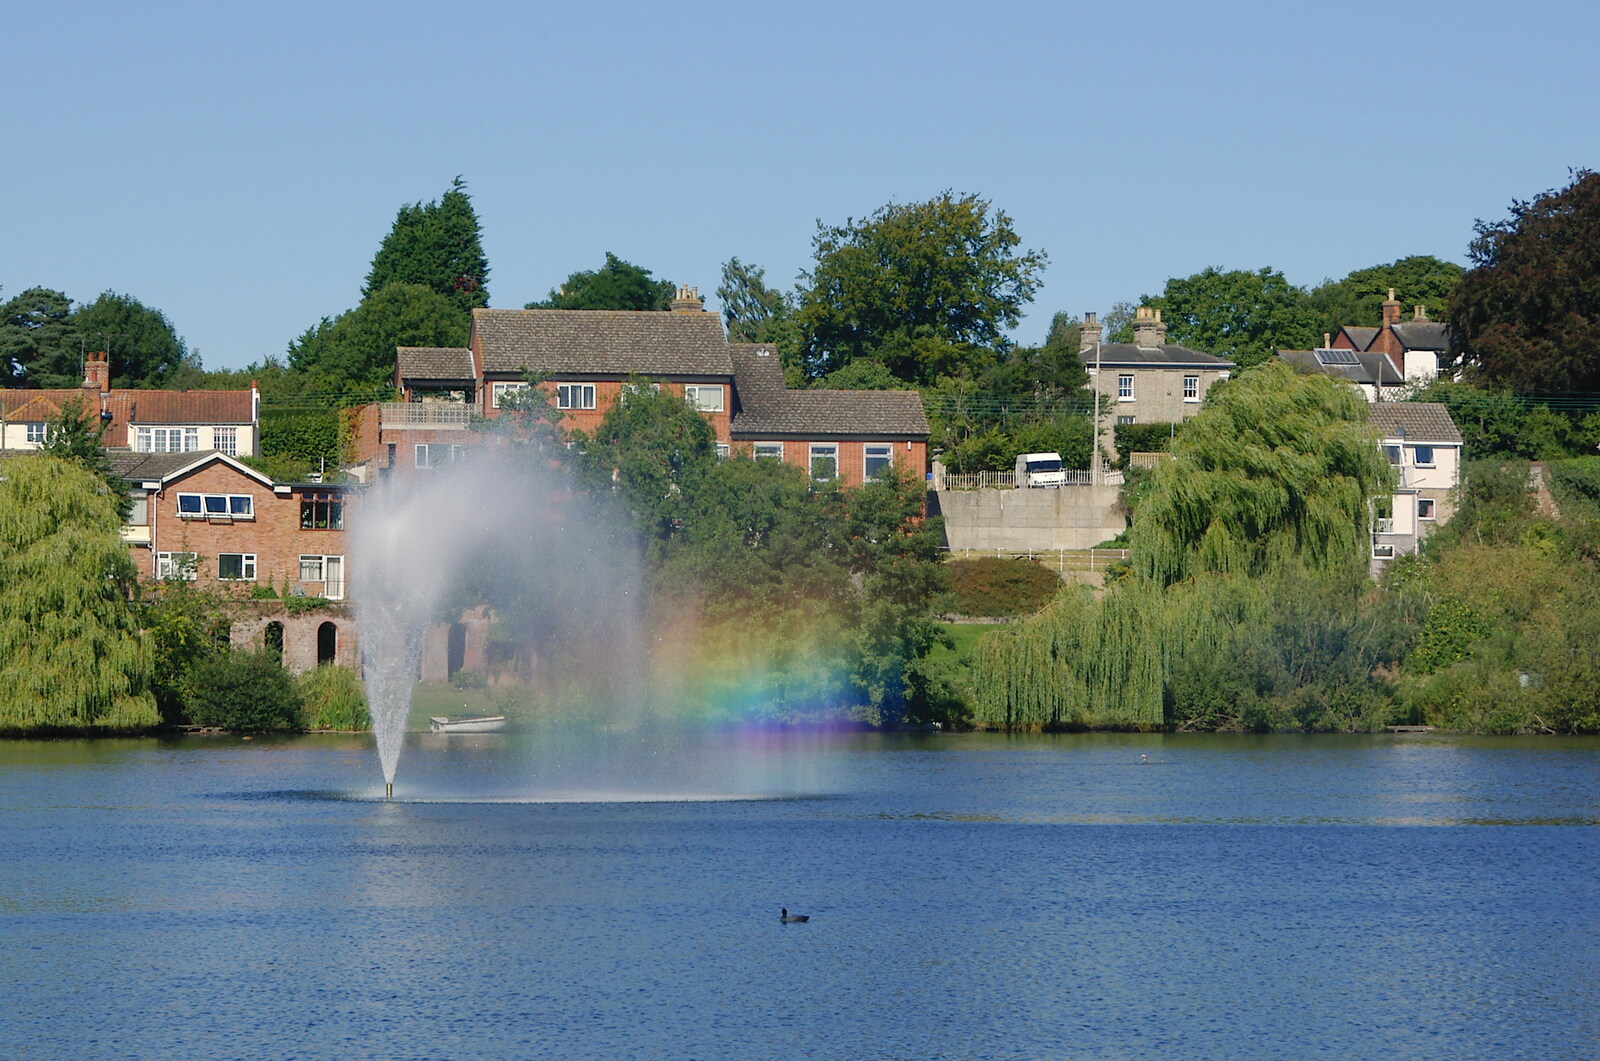 There's a nice rainbow in the Mere fountain from Life on the Neonatal Ward, Dairy Farm and Thrandeston Chapel, Suffolk - 26th August 2005